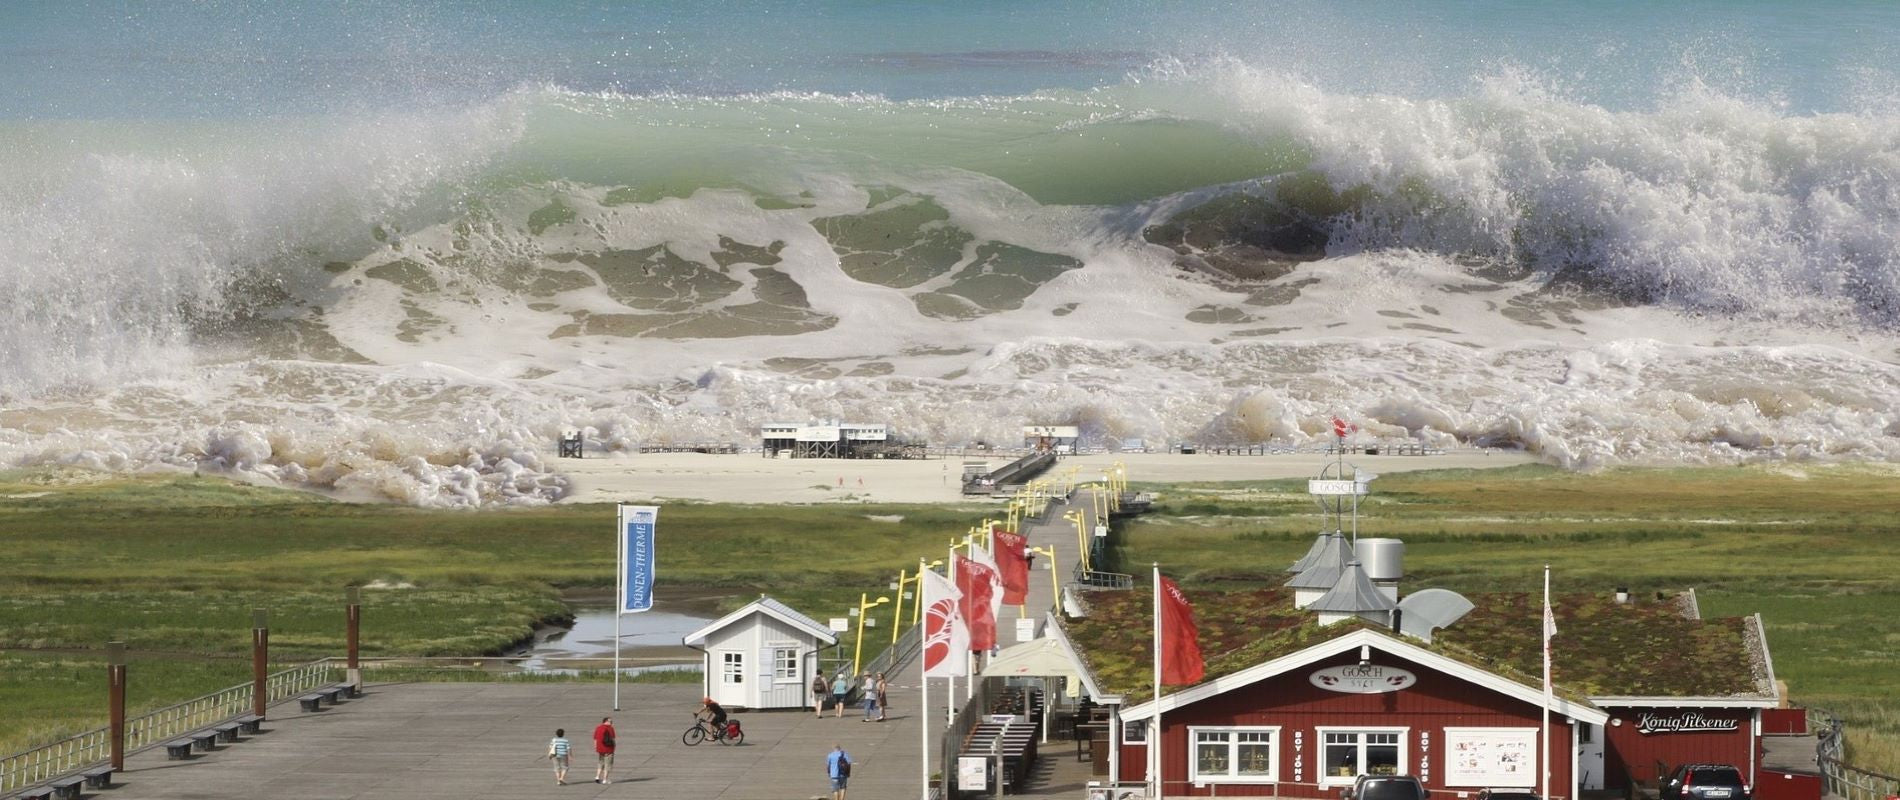 Aerial photo of inbound tsunami seaquake wave across grass field, red building, and seaside beach huts. St Peter-Ording, Germany 2016